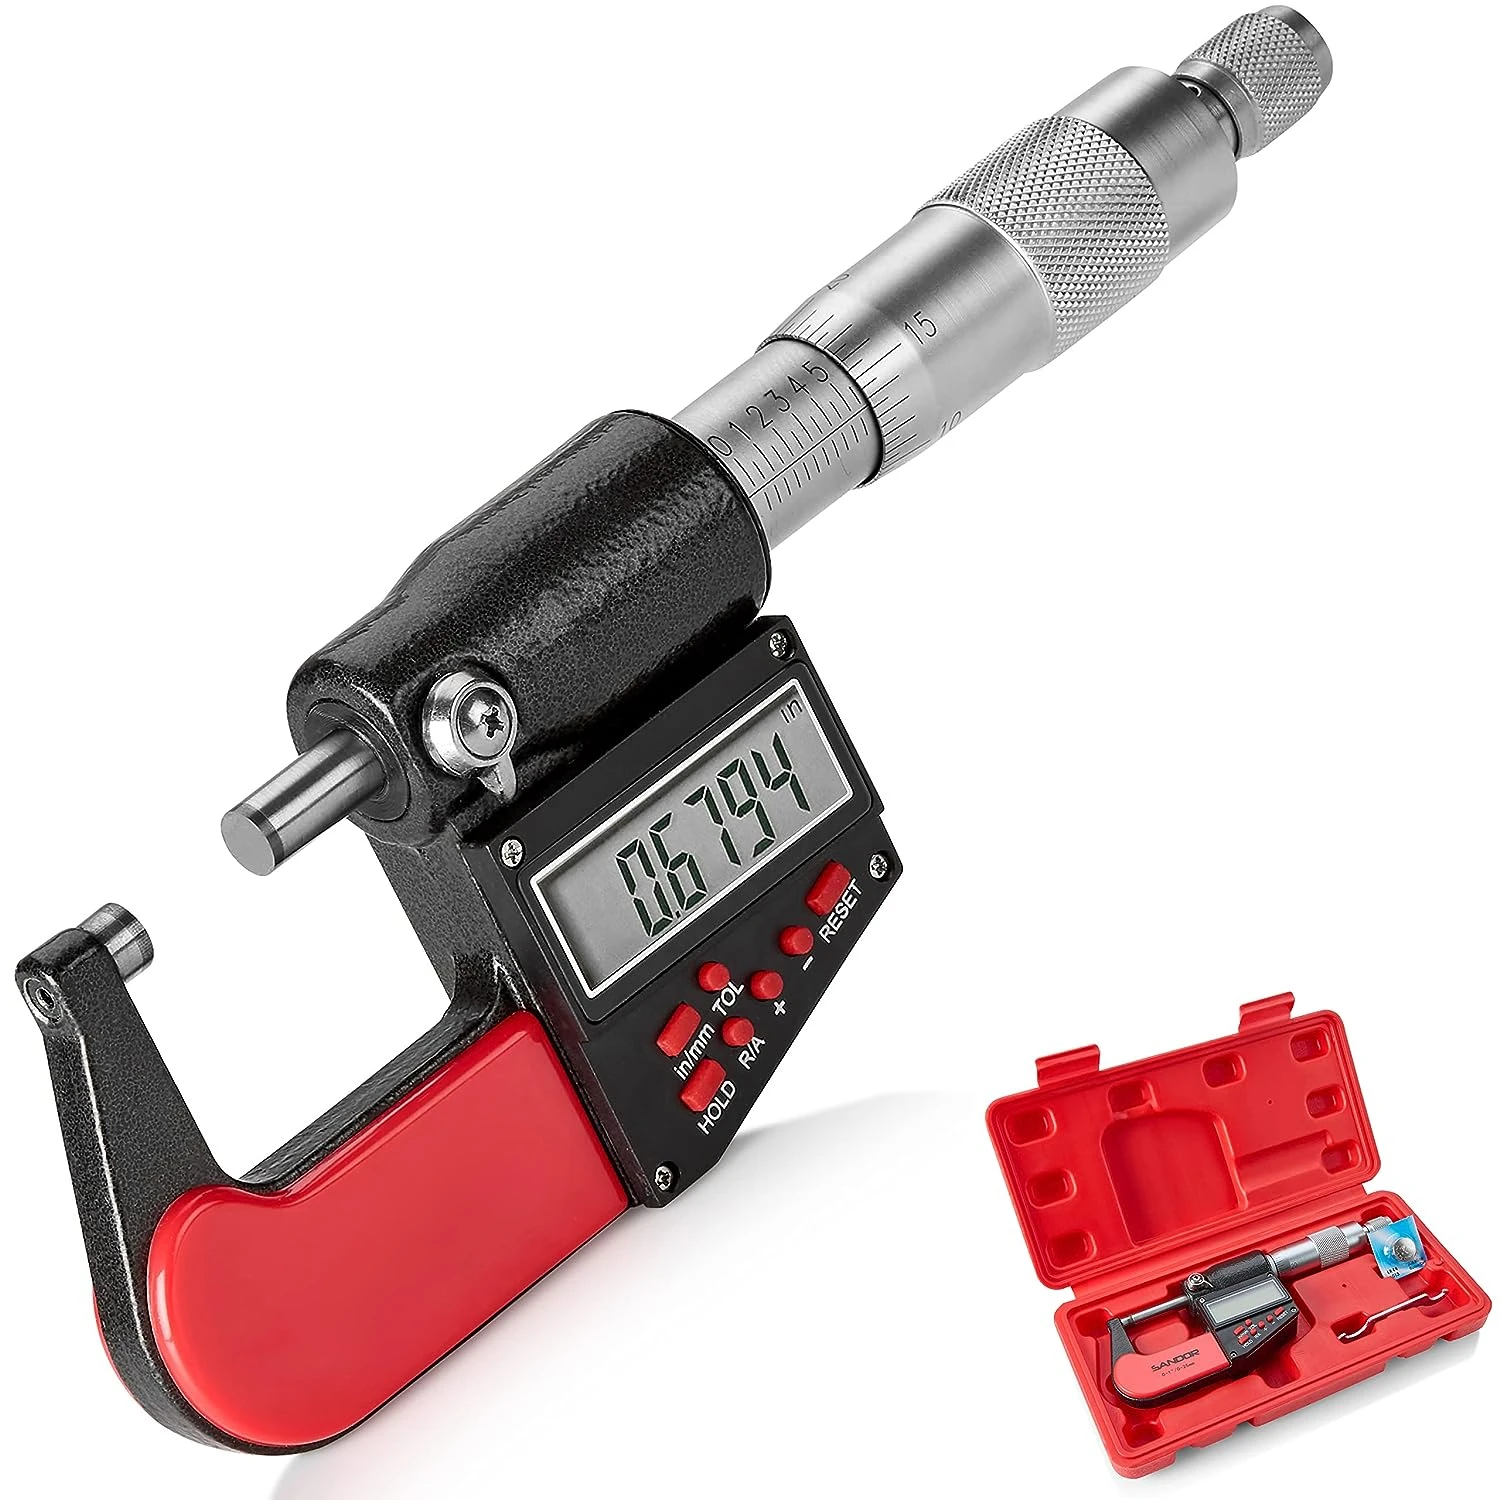 

Digital Outside Micrometer with Carbide Tip 0-1"/0-25mm Measuring Range - 0.00005" / 0.001mm Accuracy with Ratchet Stop